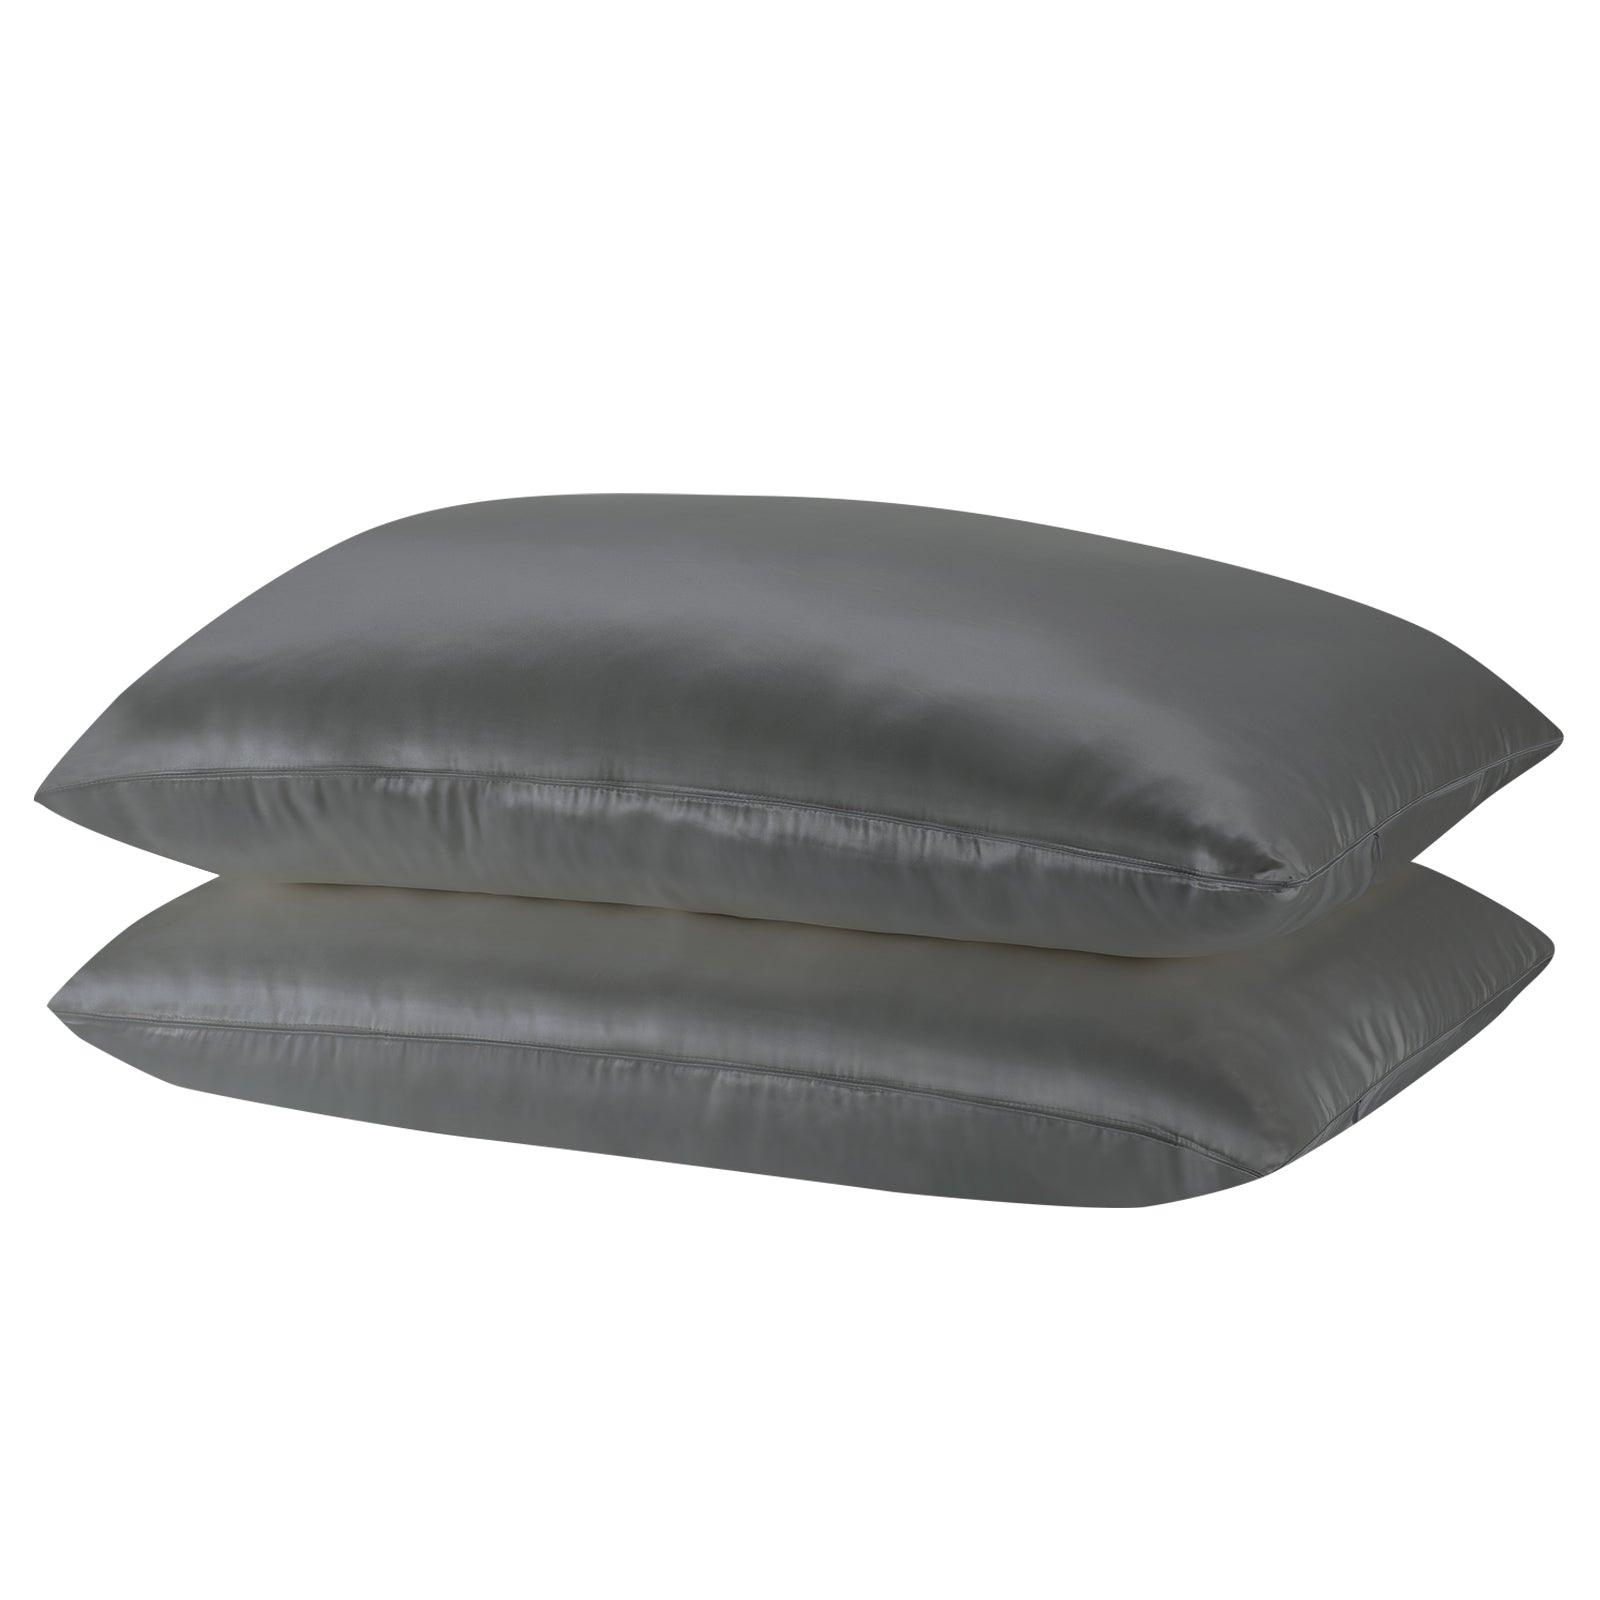 Royal Comfort Mulberry Soft Silk Hypoallergenic Pillowcase Twin Pack 51 x 76cm - Charcoal